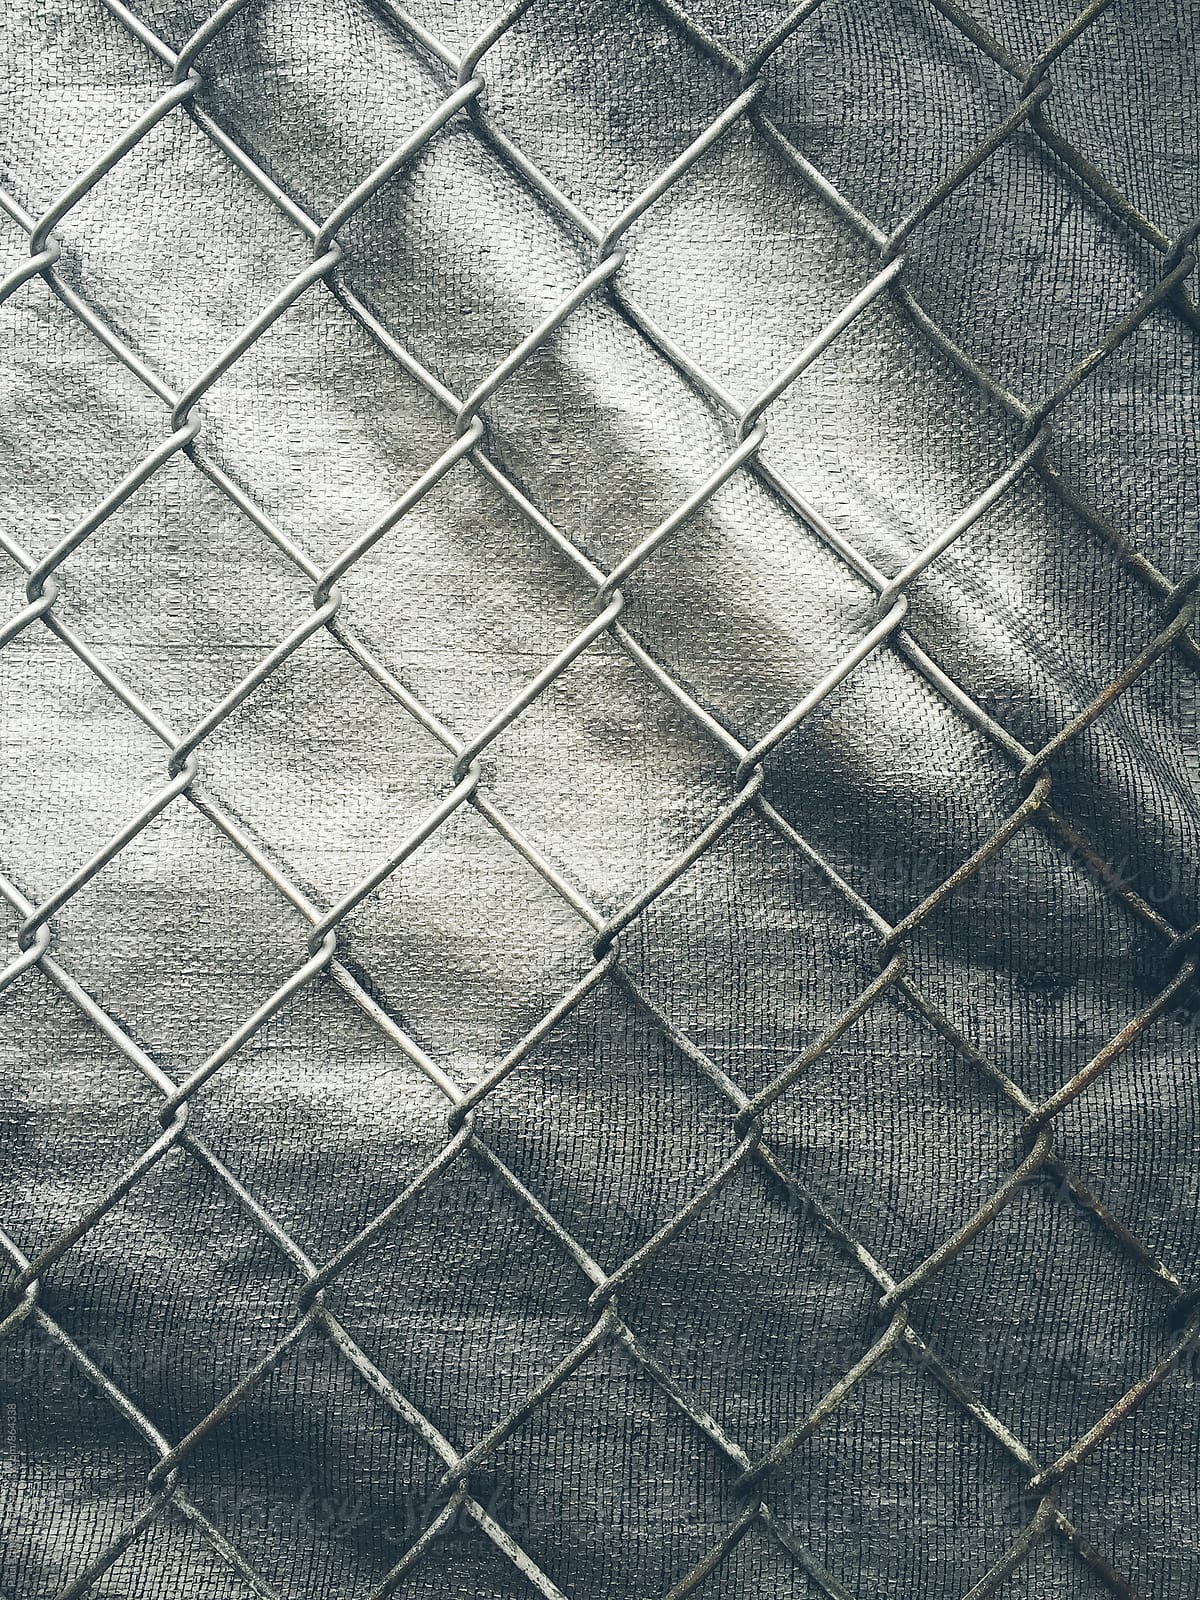 Close up of chain-link fence and silver tarp